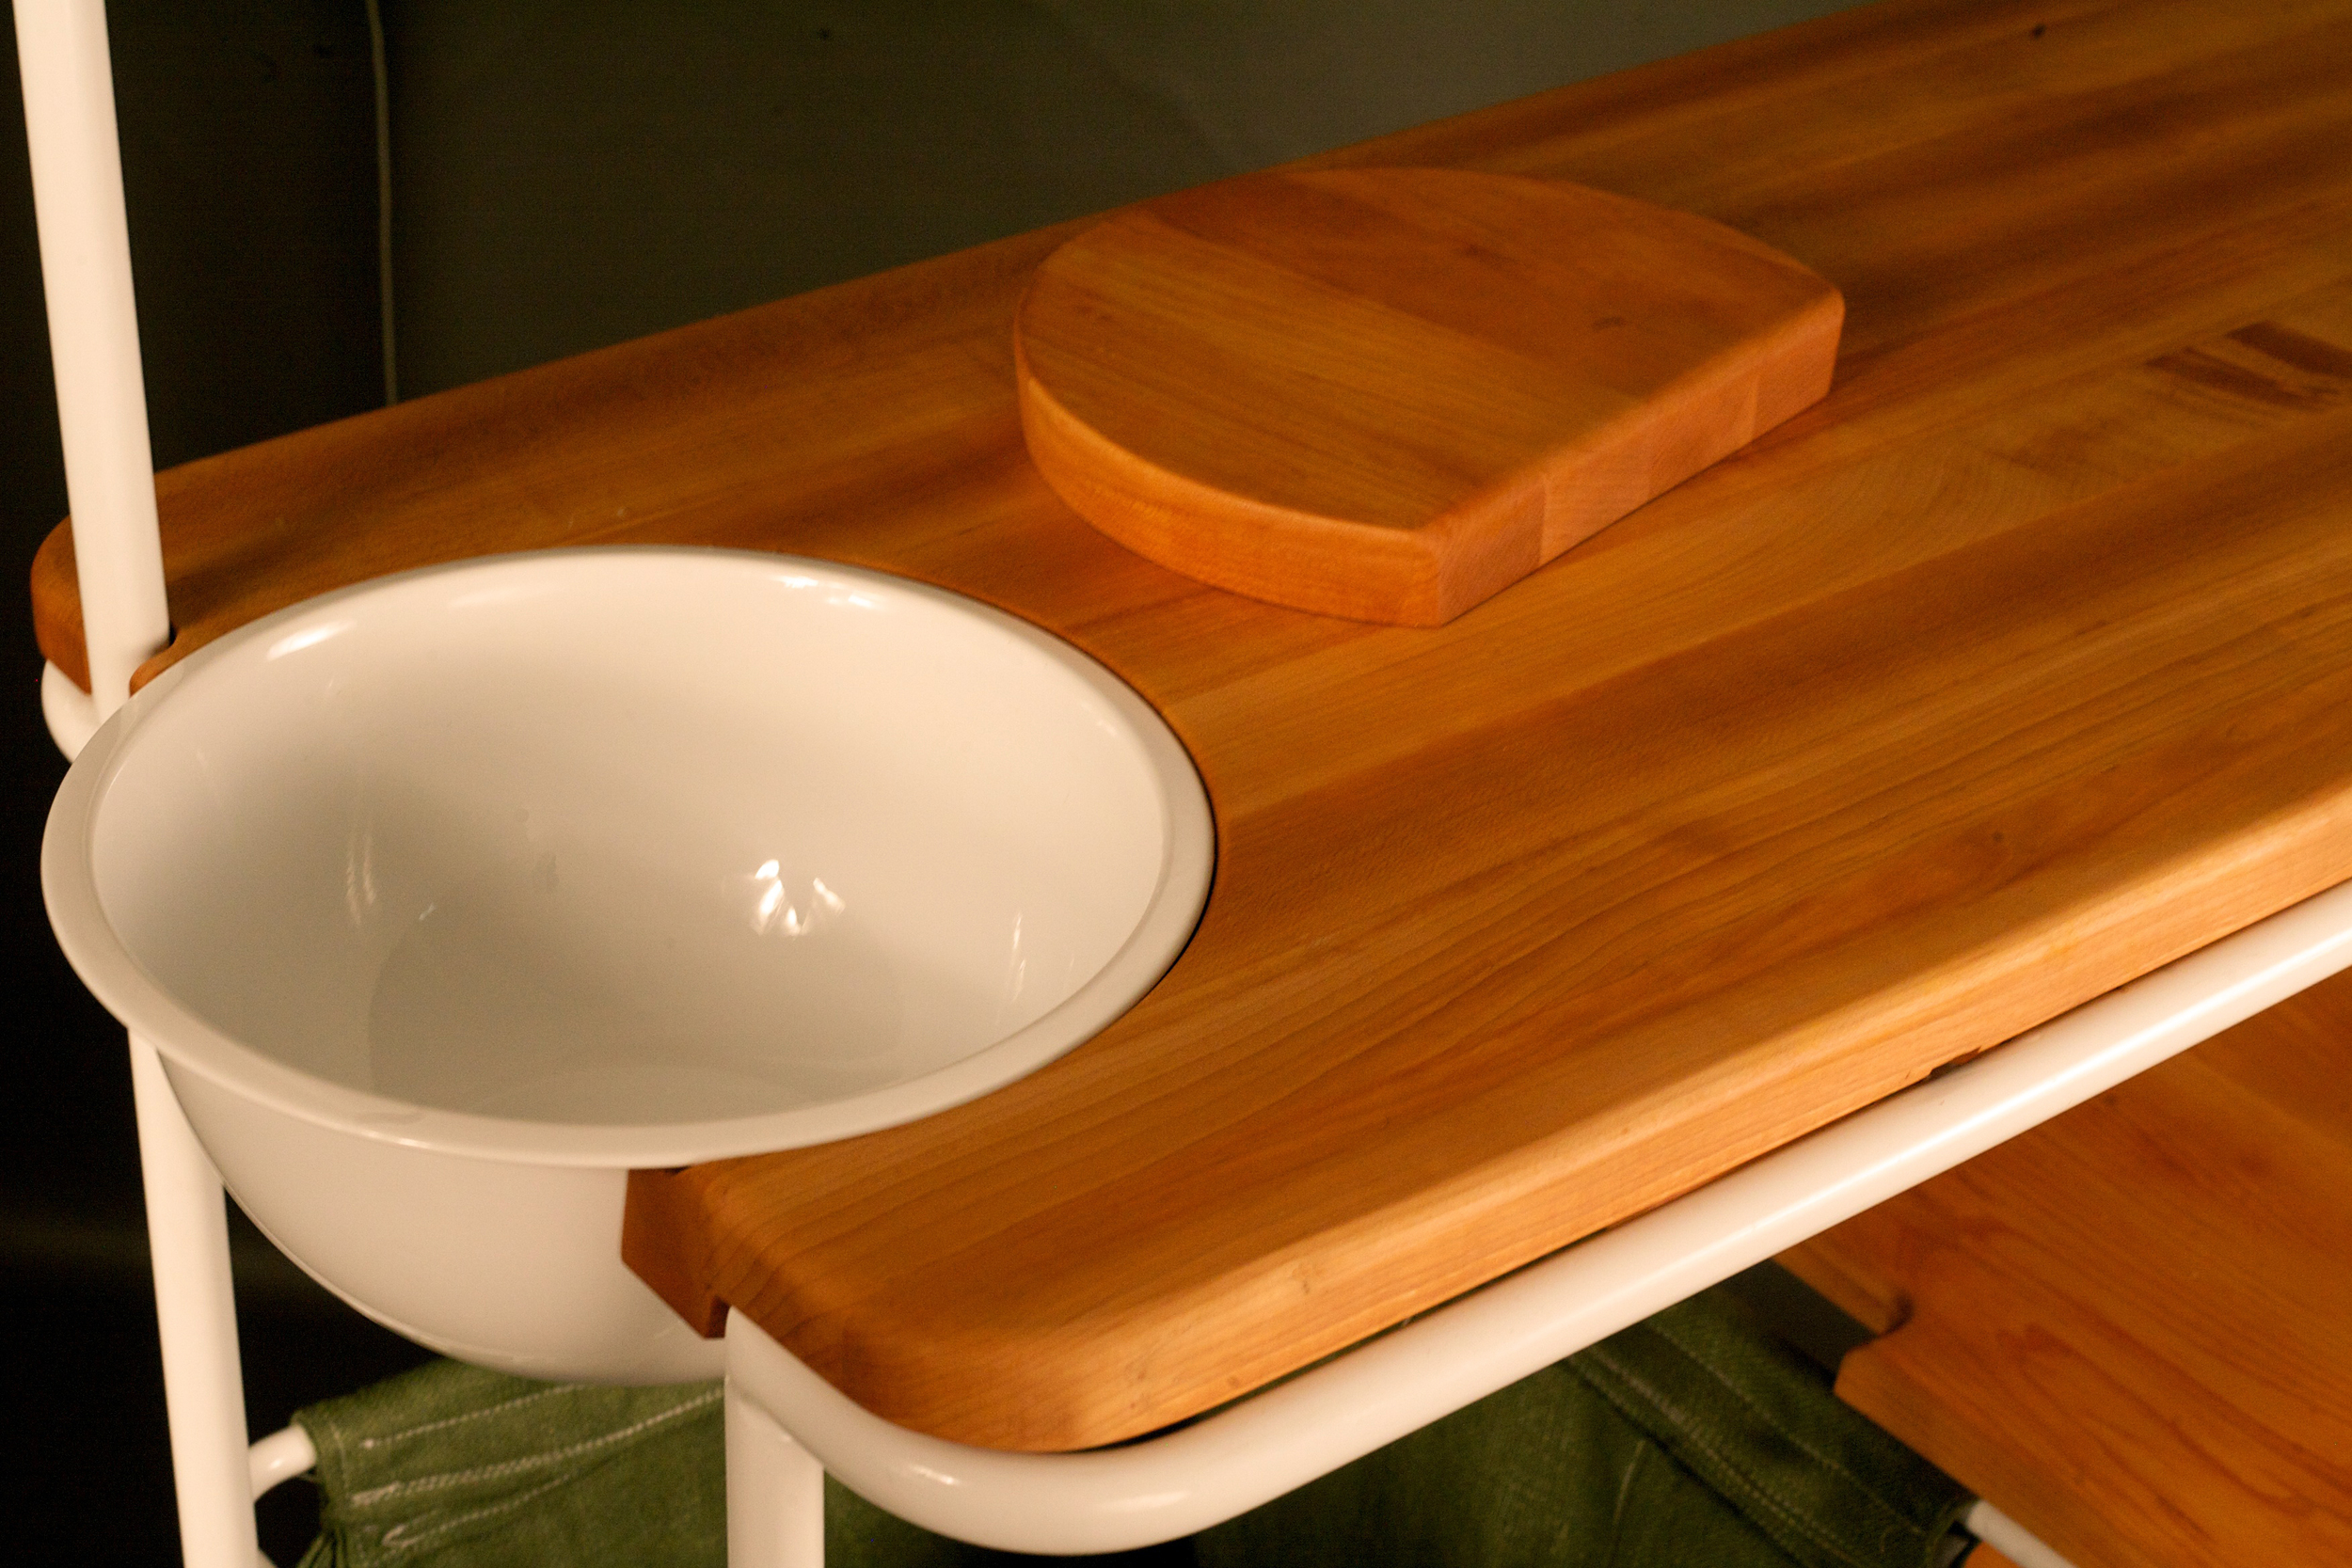 Detail of the removable bowl and cutting board.